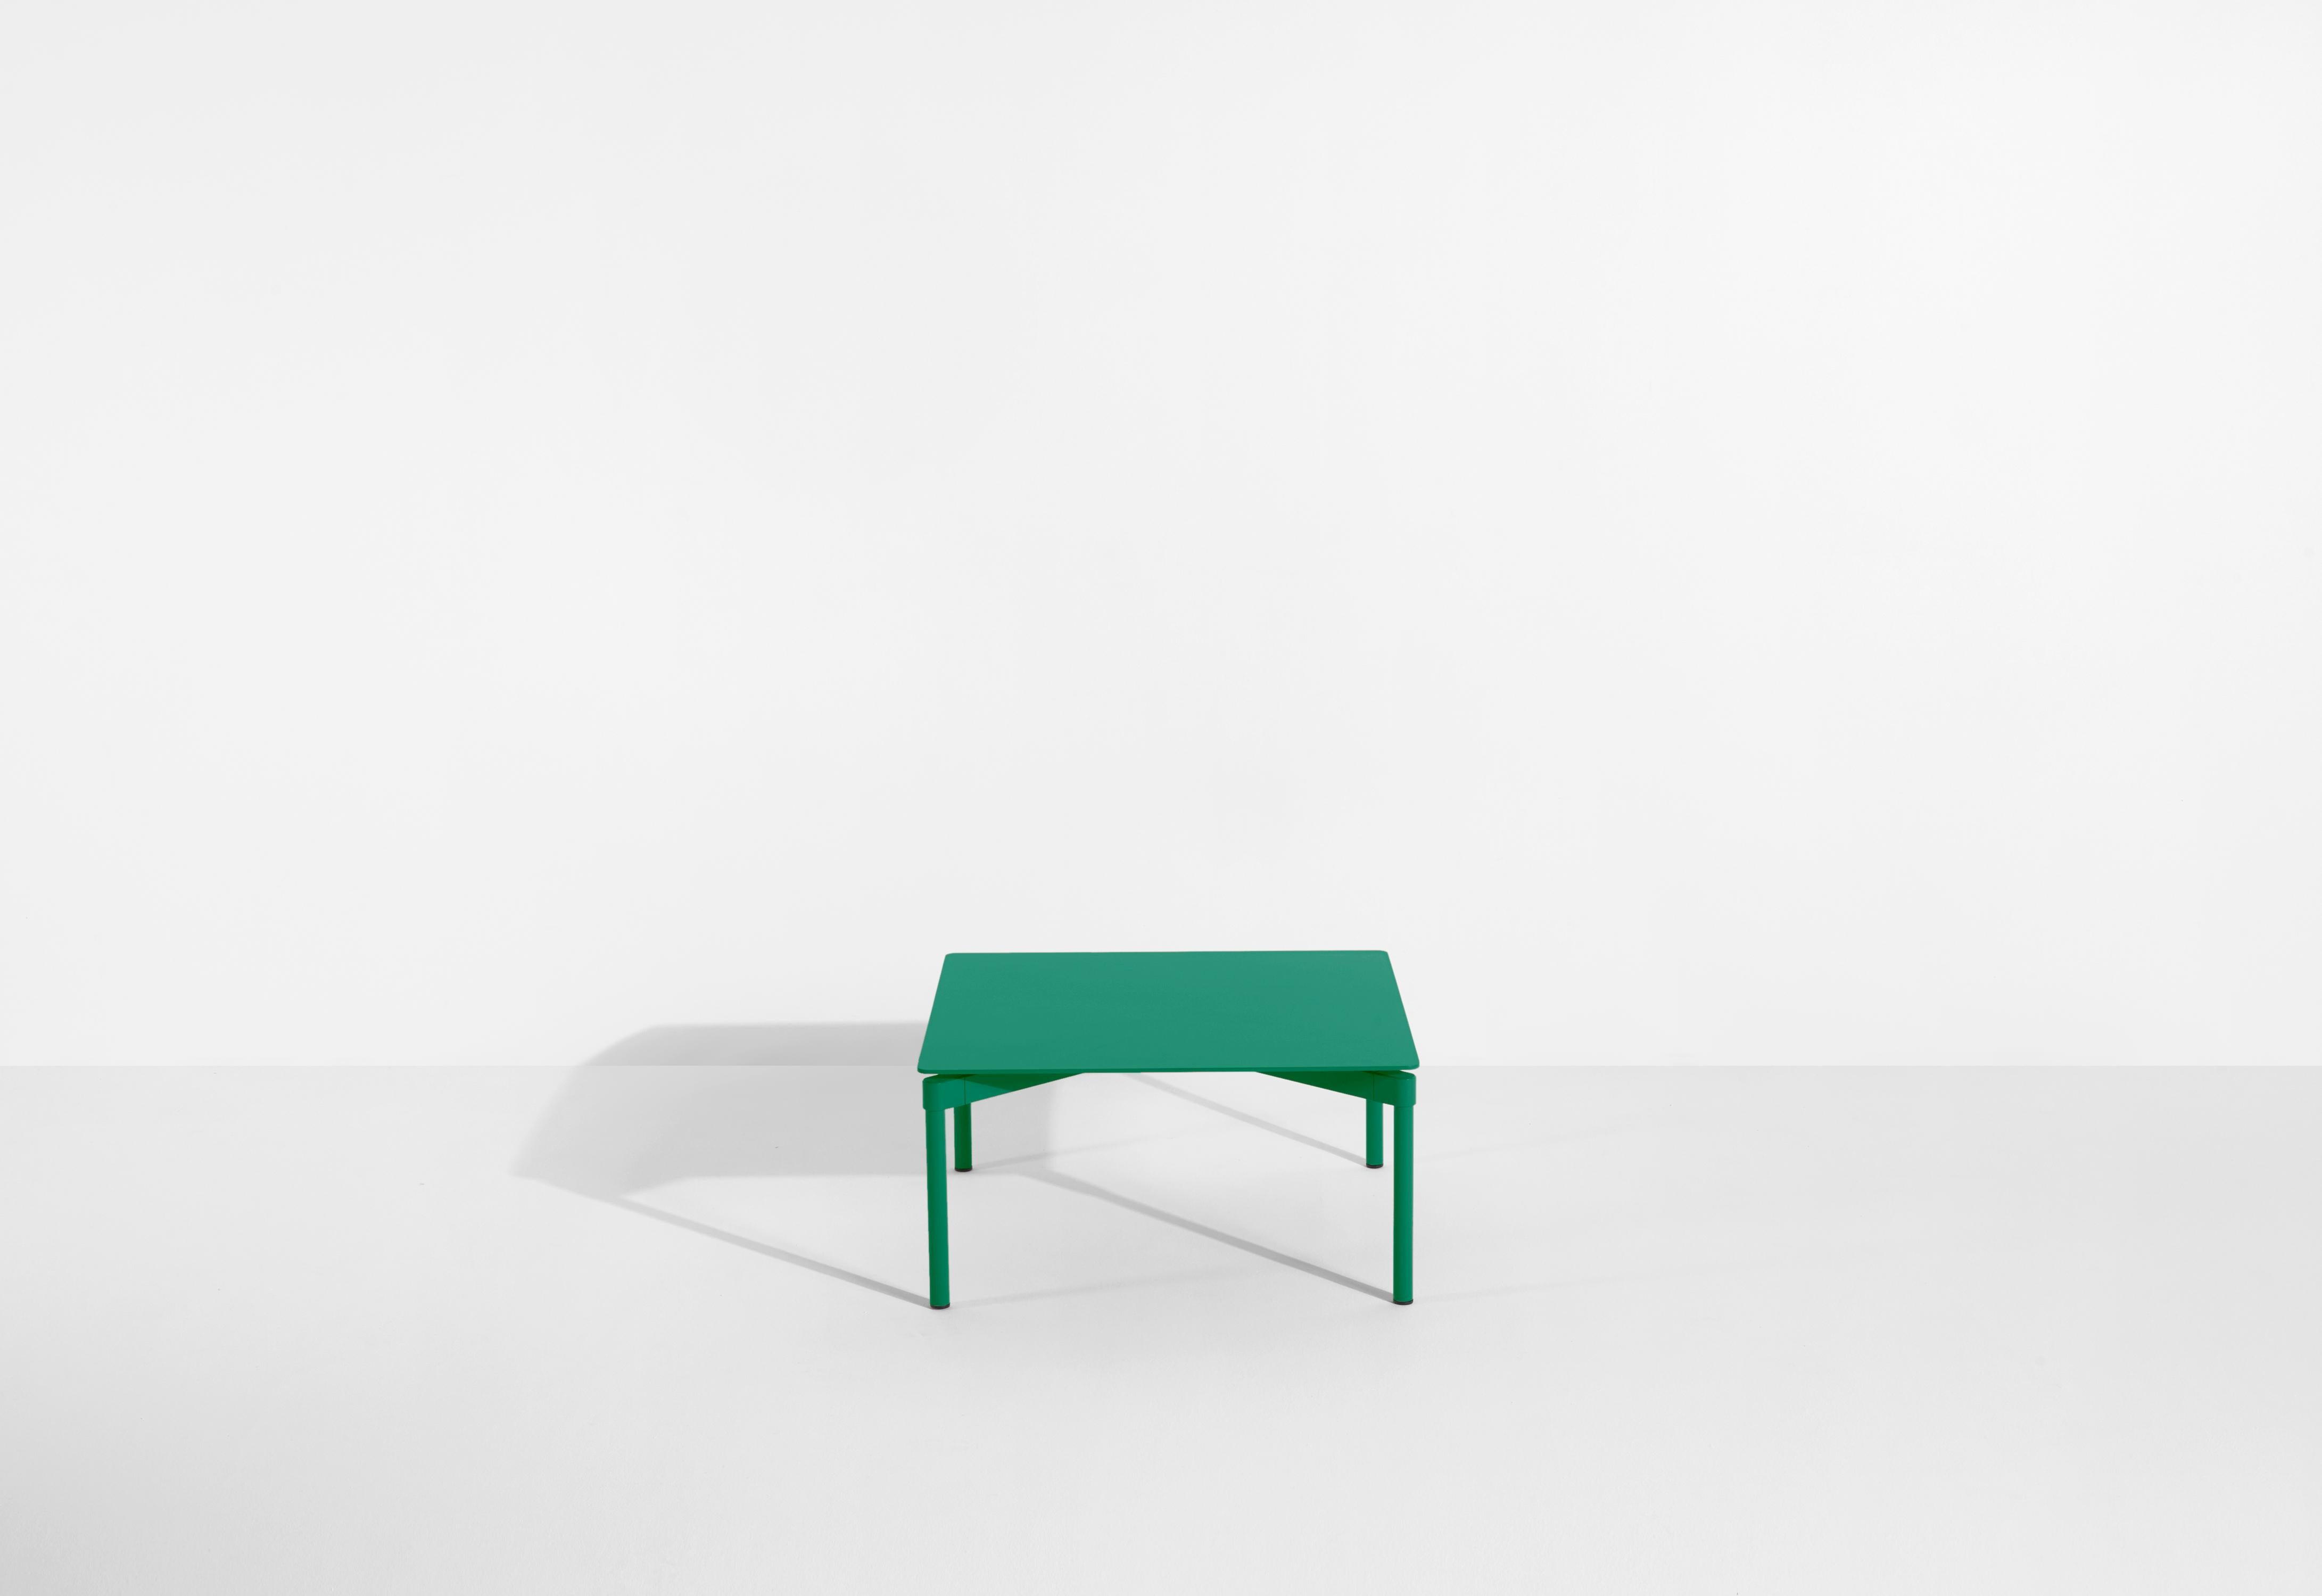 Petite Friture Fromme Coffee Table in Mint-Green Aluminium by Tom Chung, 2020 In New Condition For Sale In Brooklyn, NY